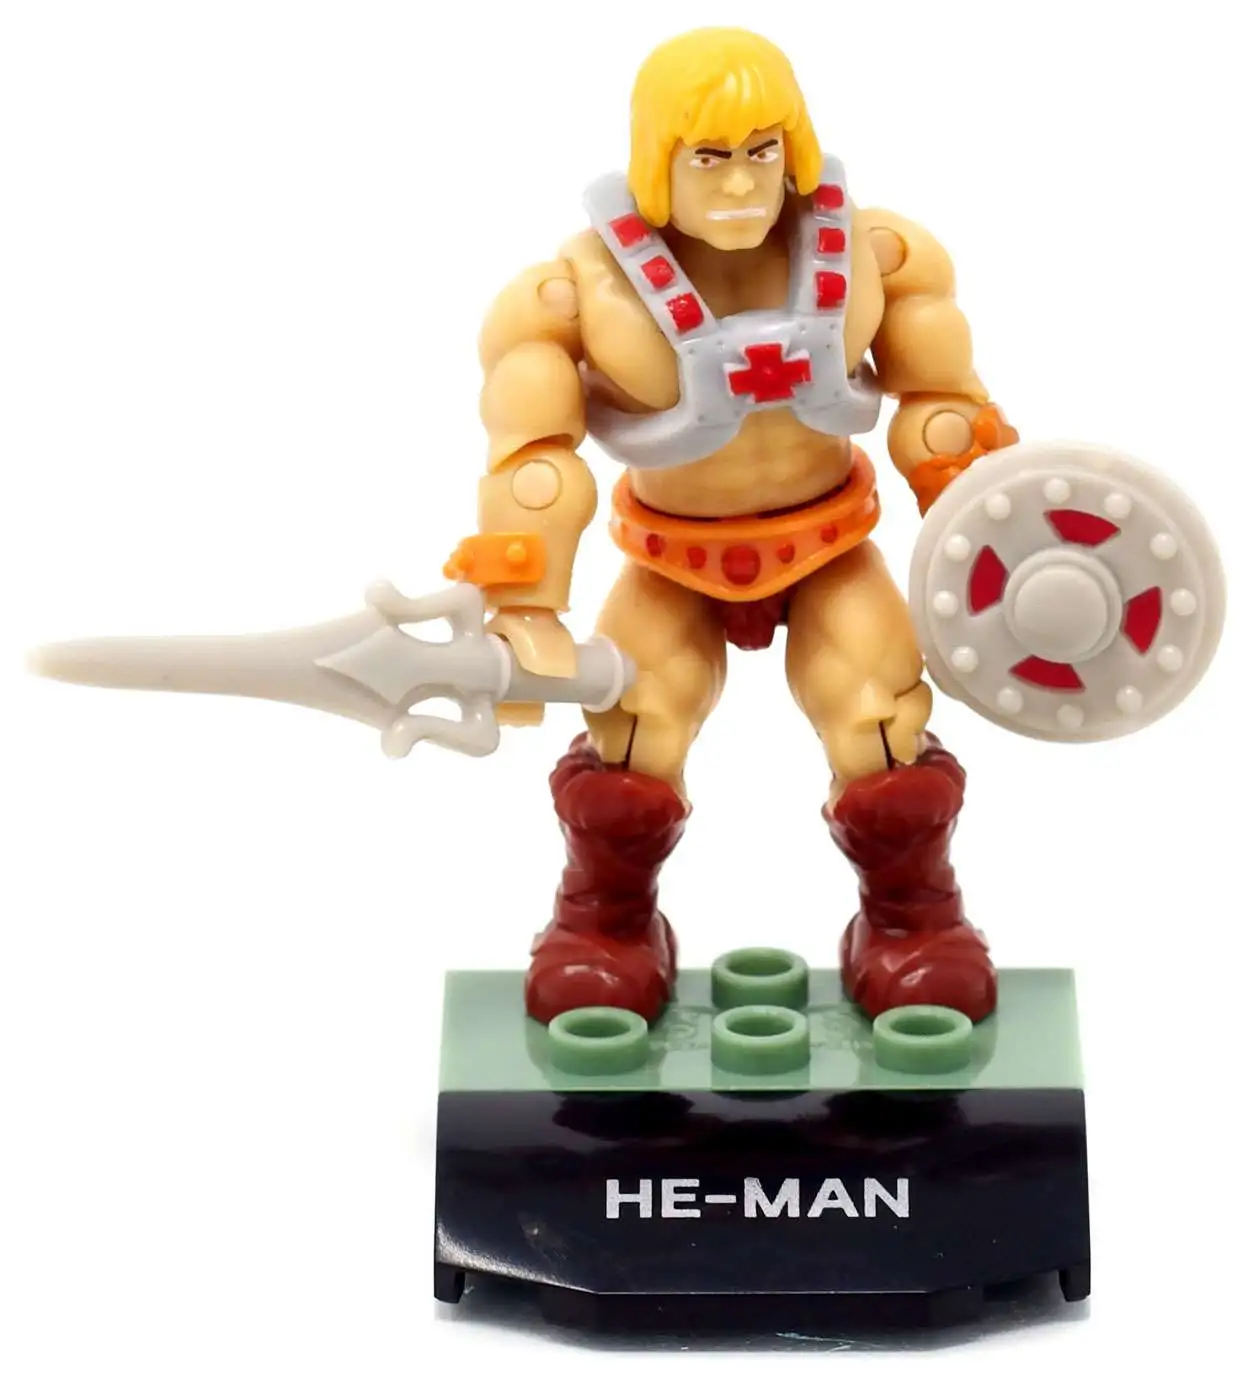 Mega Construx Heroes Series 1 Masters of the Universe HE-MAN Figure 